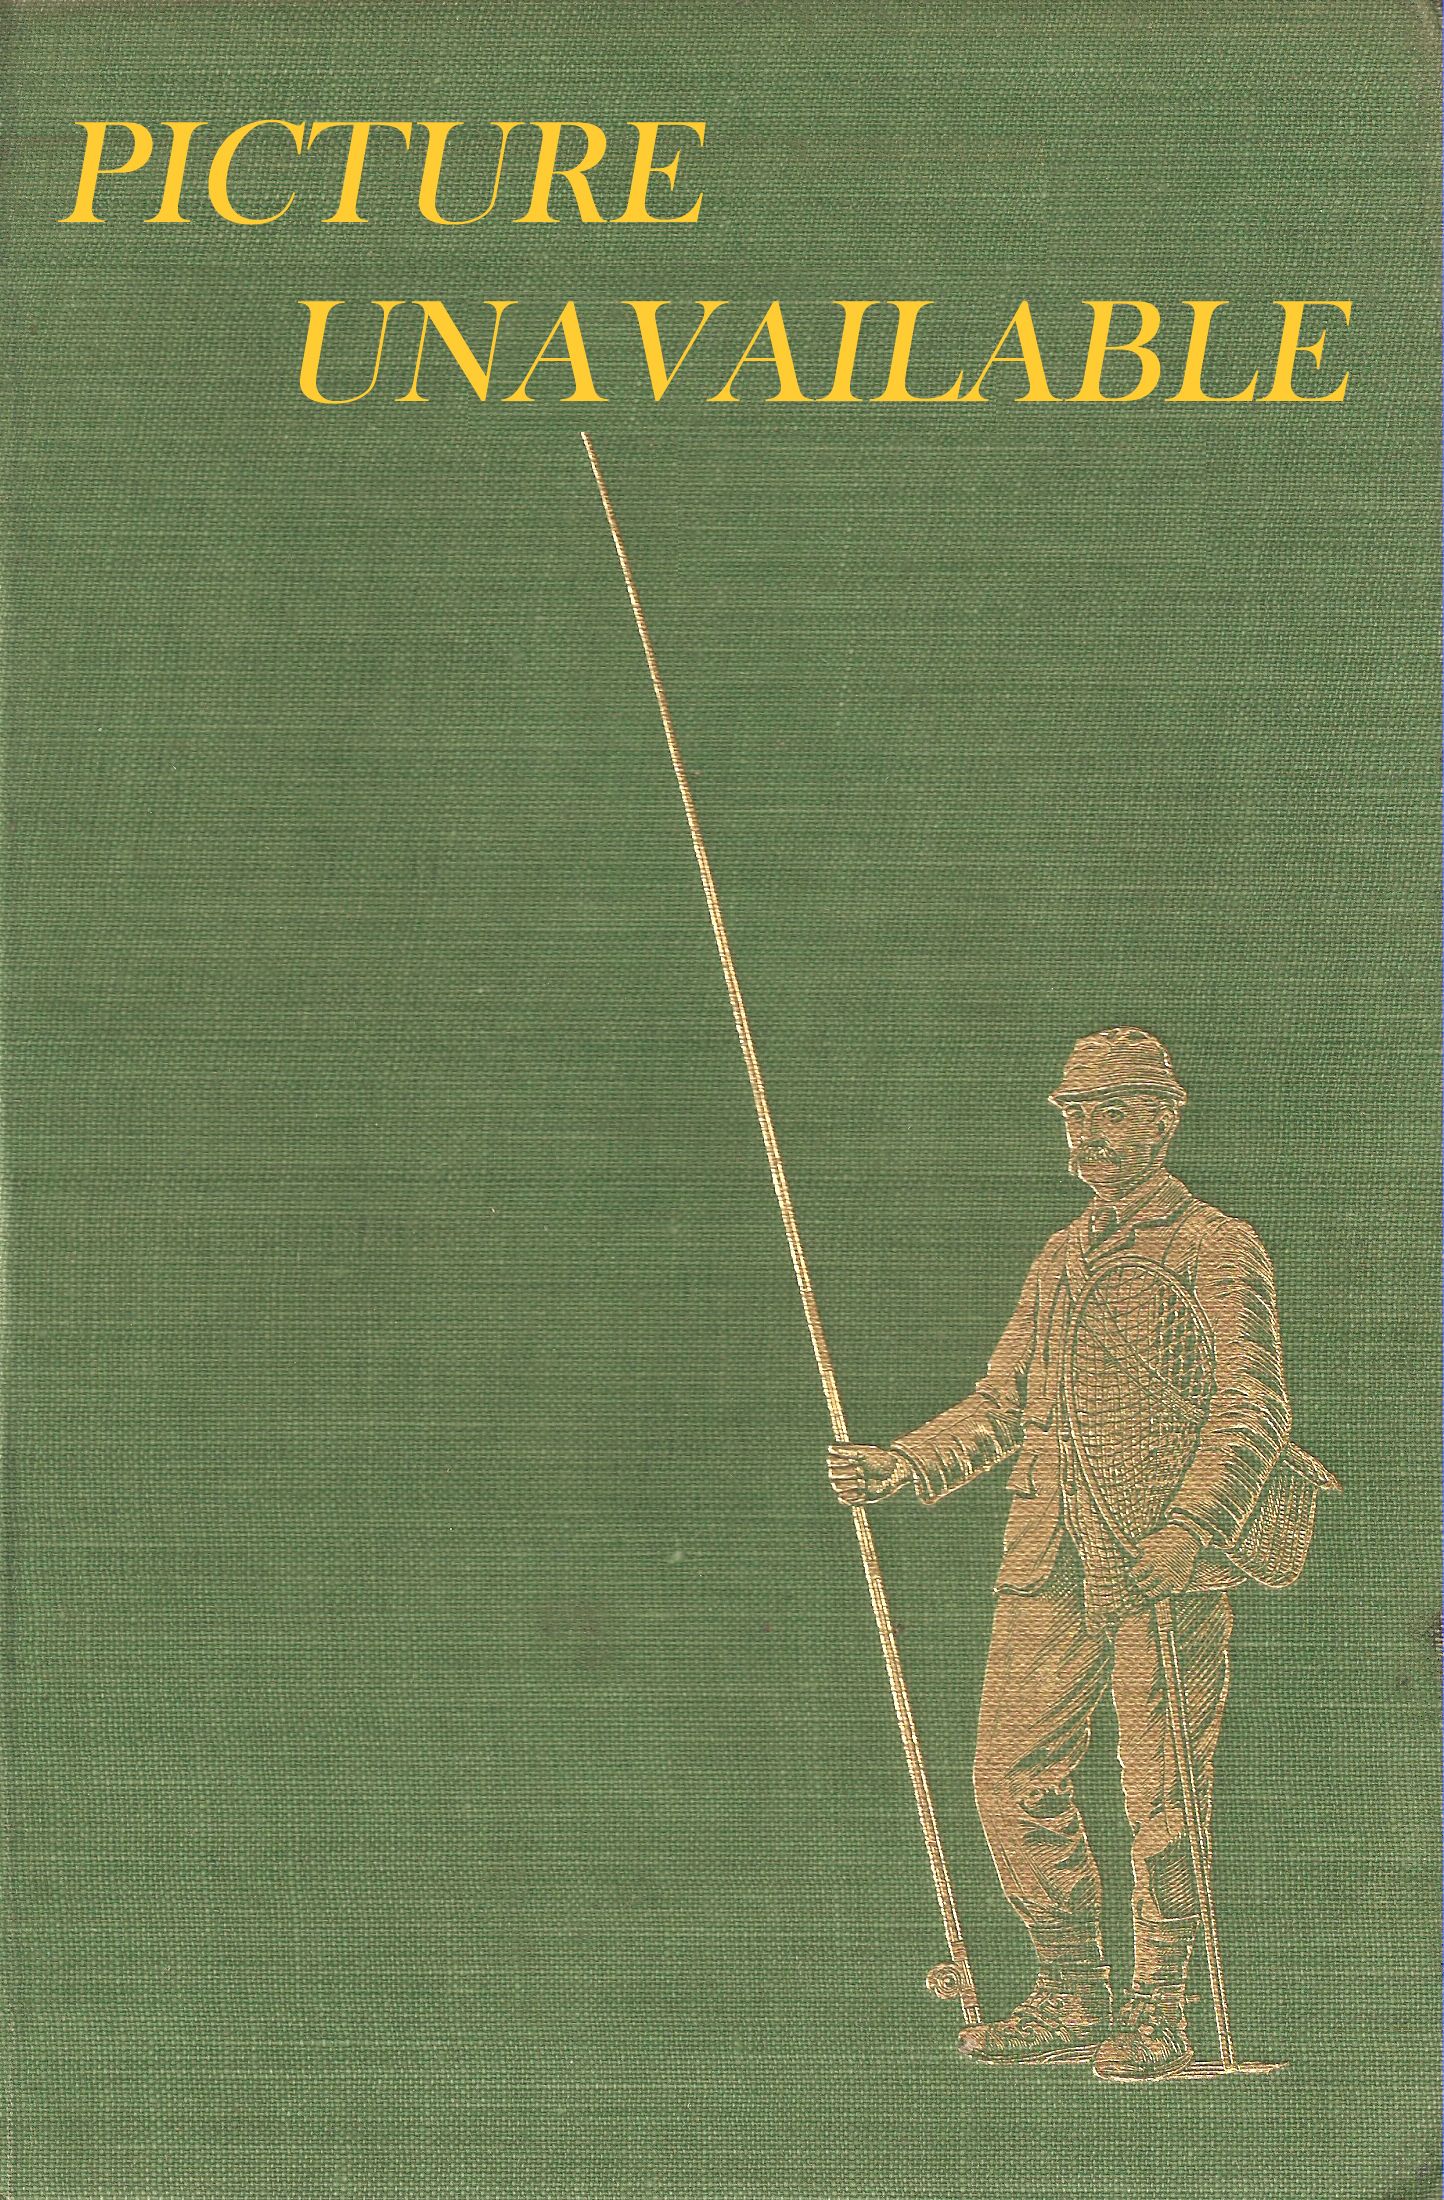 FISHING: WHEN, WHERE, AND HOW TO FISH. A BRIEF PRACTICAL GUIDE TO FISHING ON RIVER, LAKE AND STREAM. By Arthur Sharp.